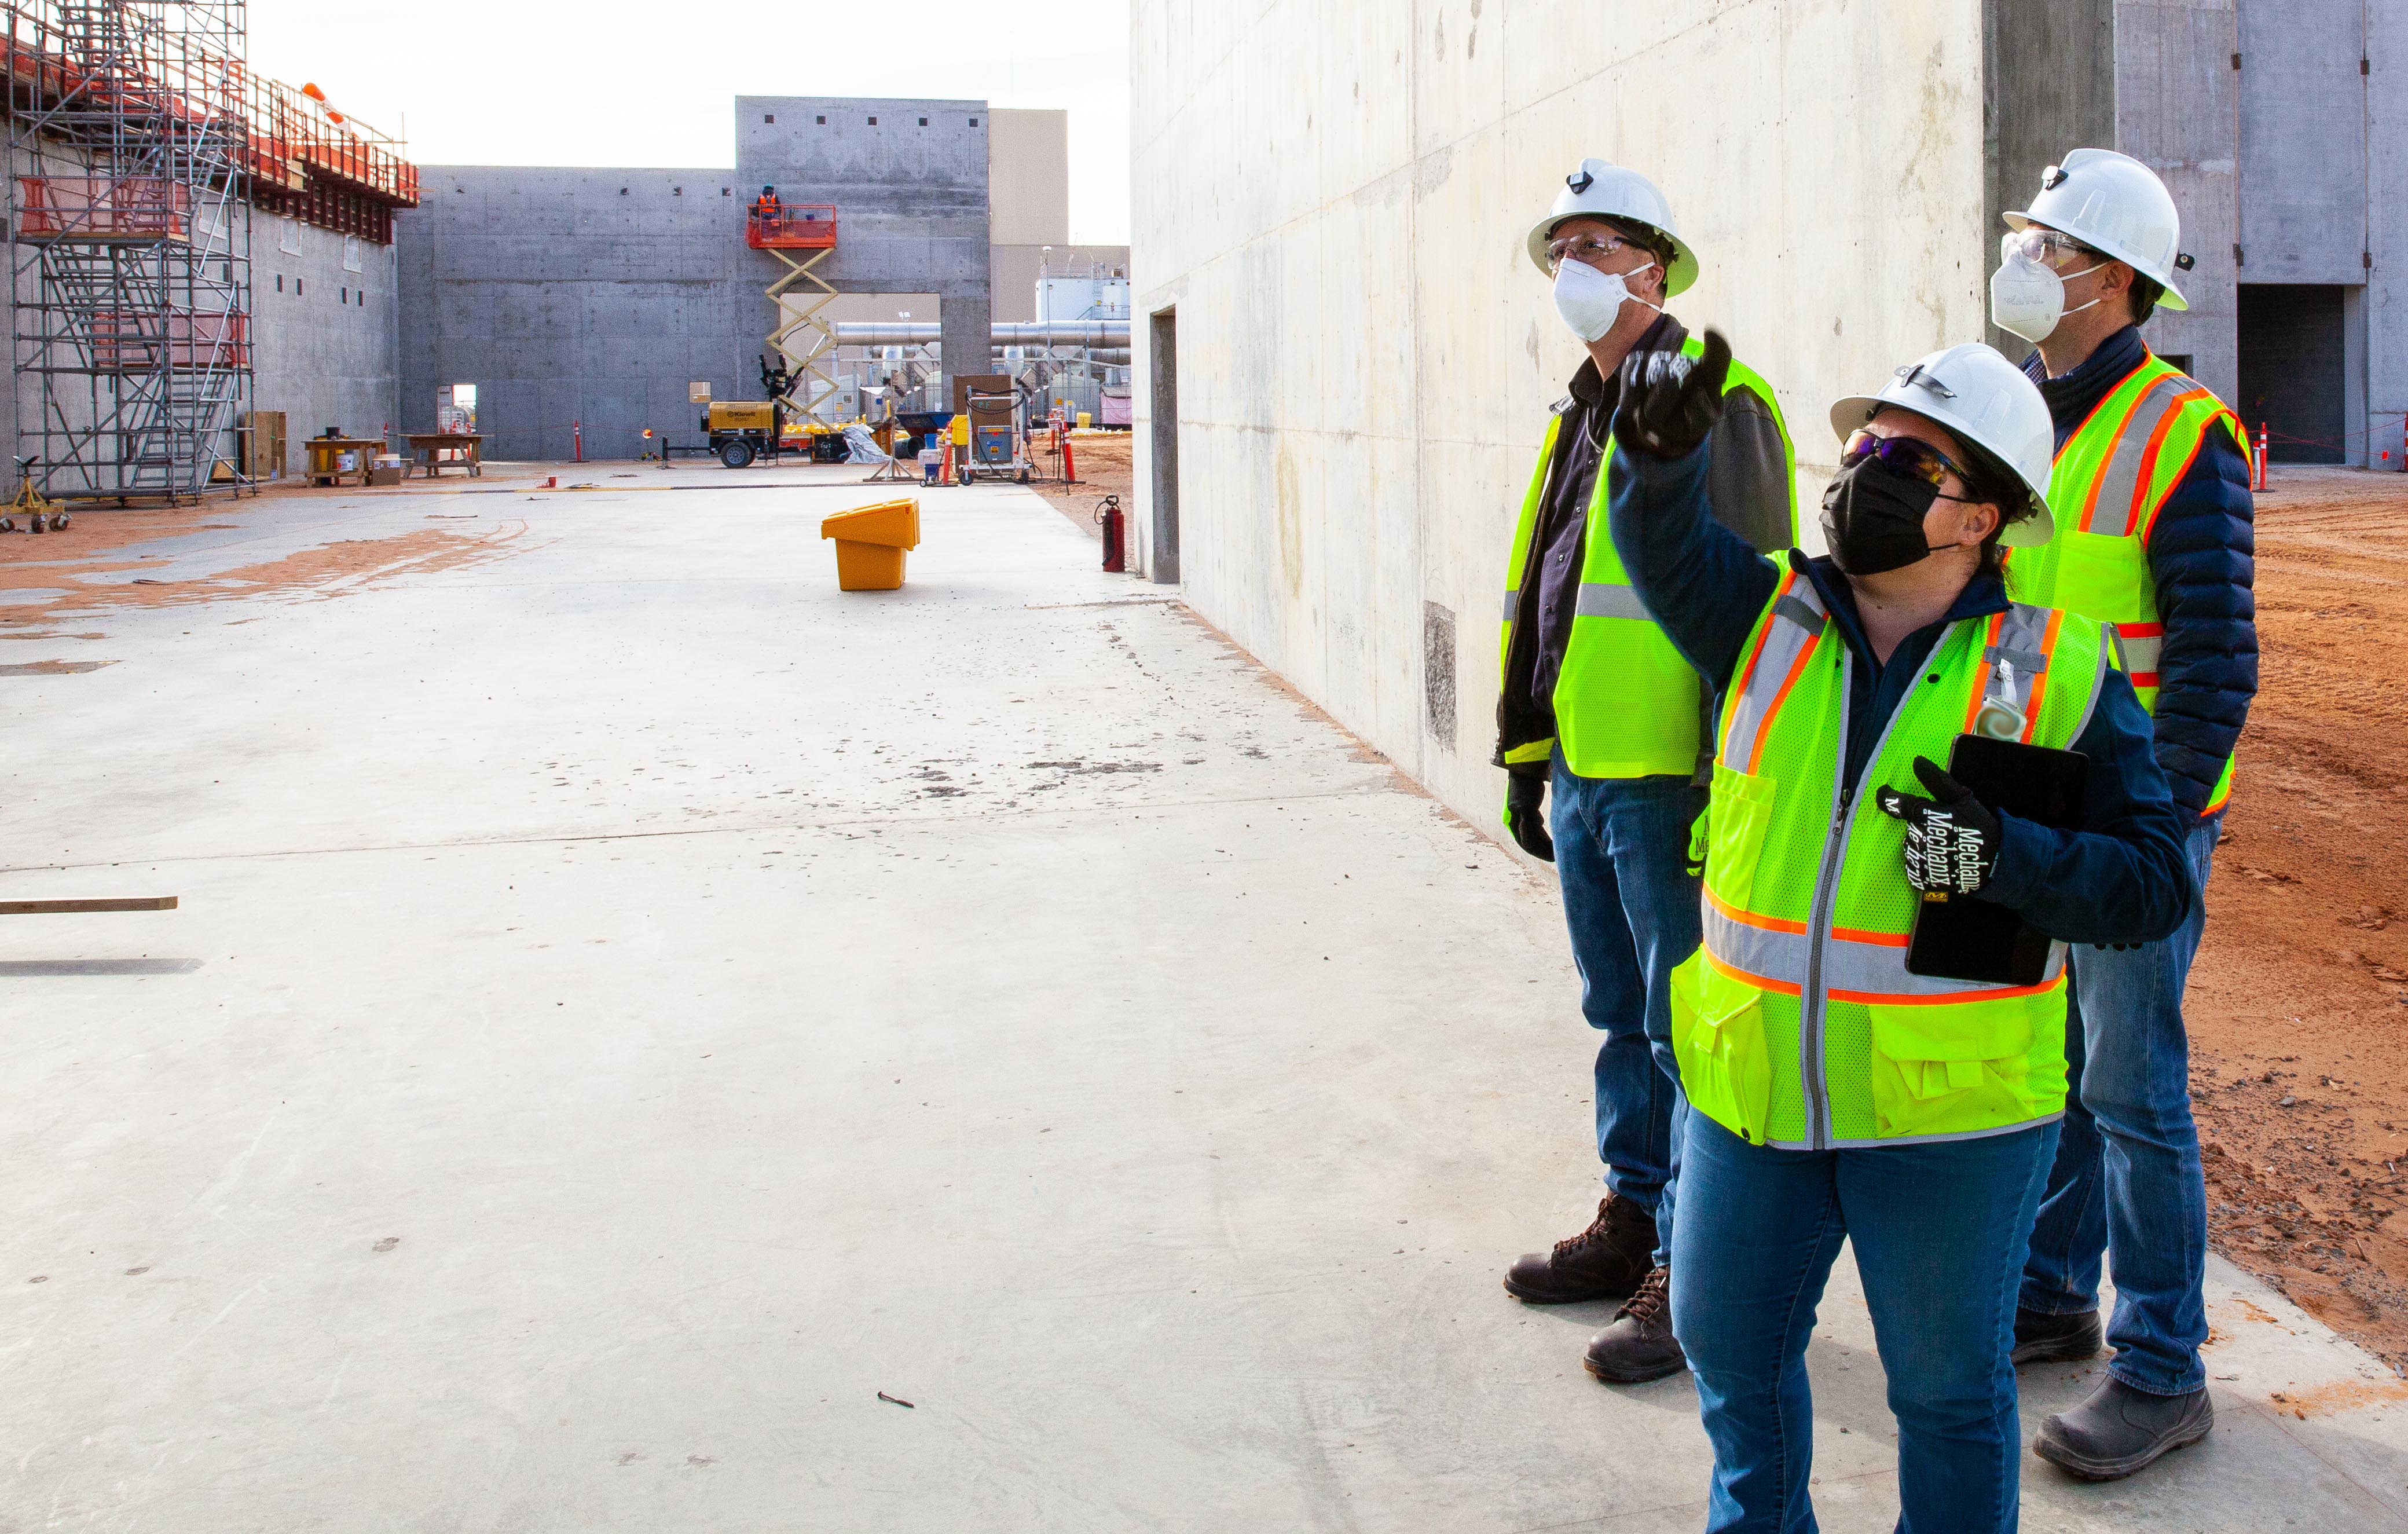 DOE employees tour new construction at WIPP